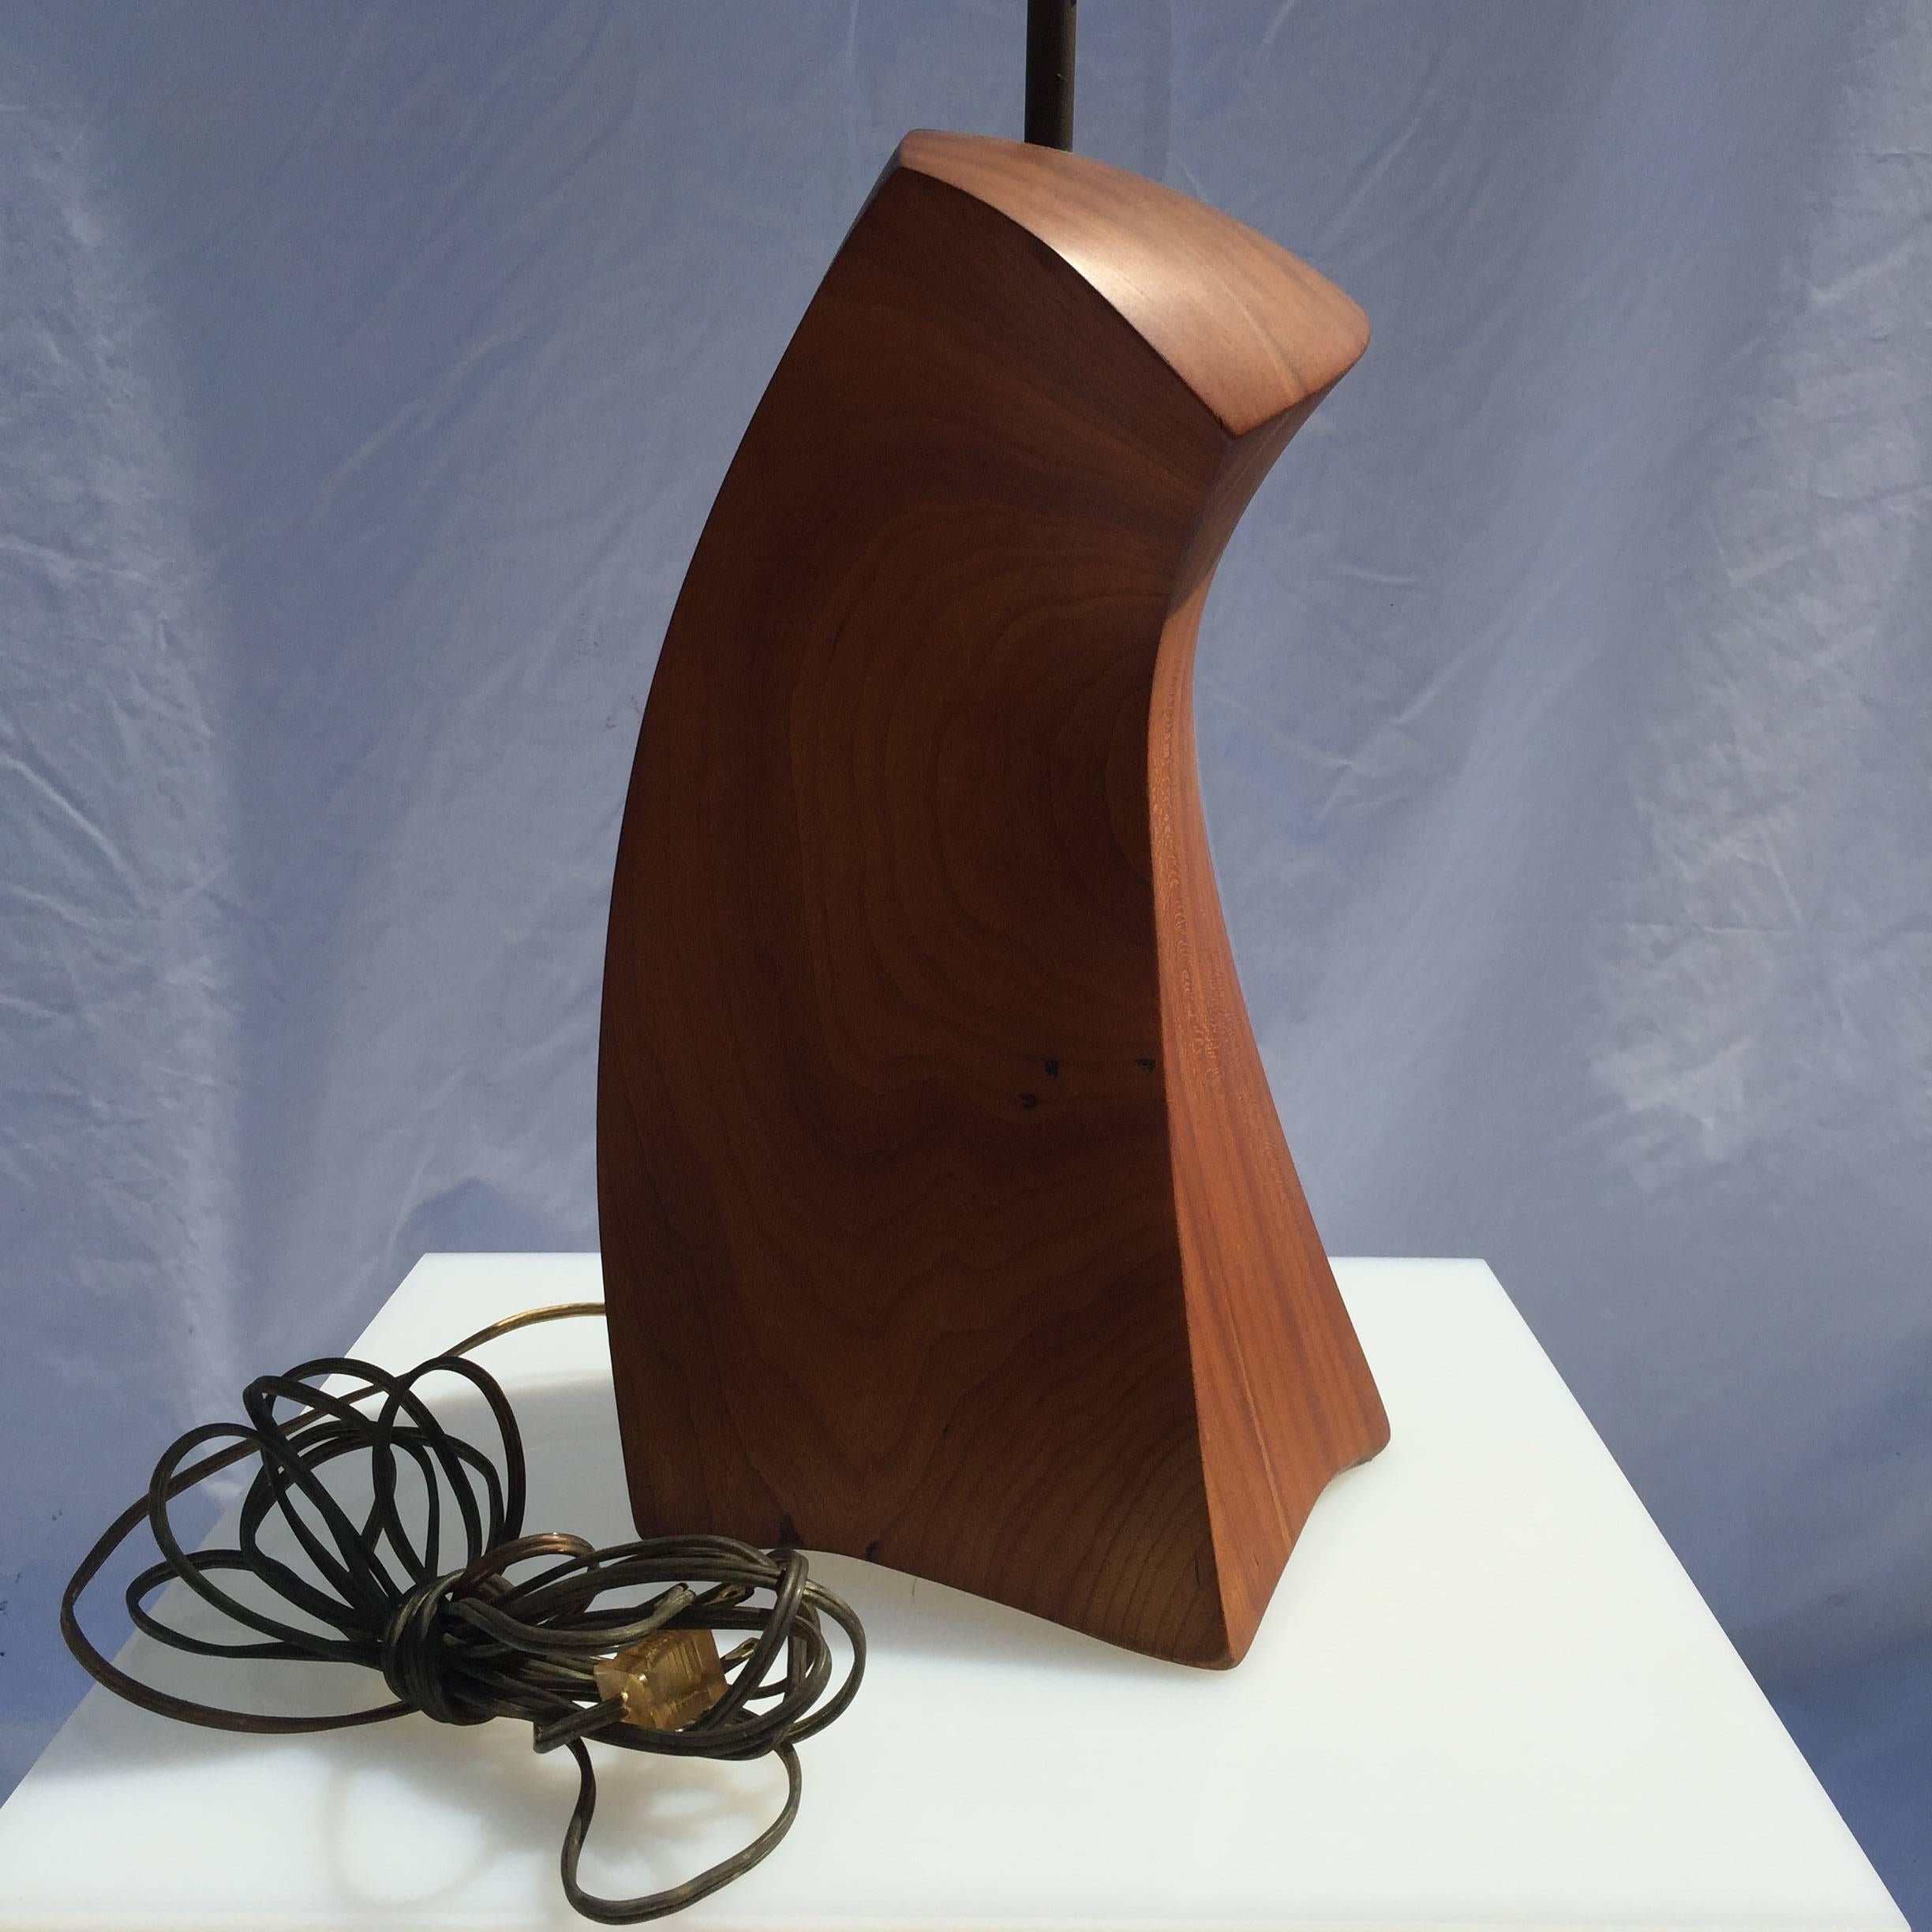 A beautifully hand-carved, hand finished Craft made table lamp by American woodworker Eric Sprenger. Signed on the side. Lamp measures 15.5 inches high to the top of the carving.

Eric Sprenger comments about his work, for over 30 years I have